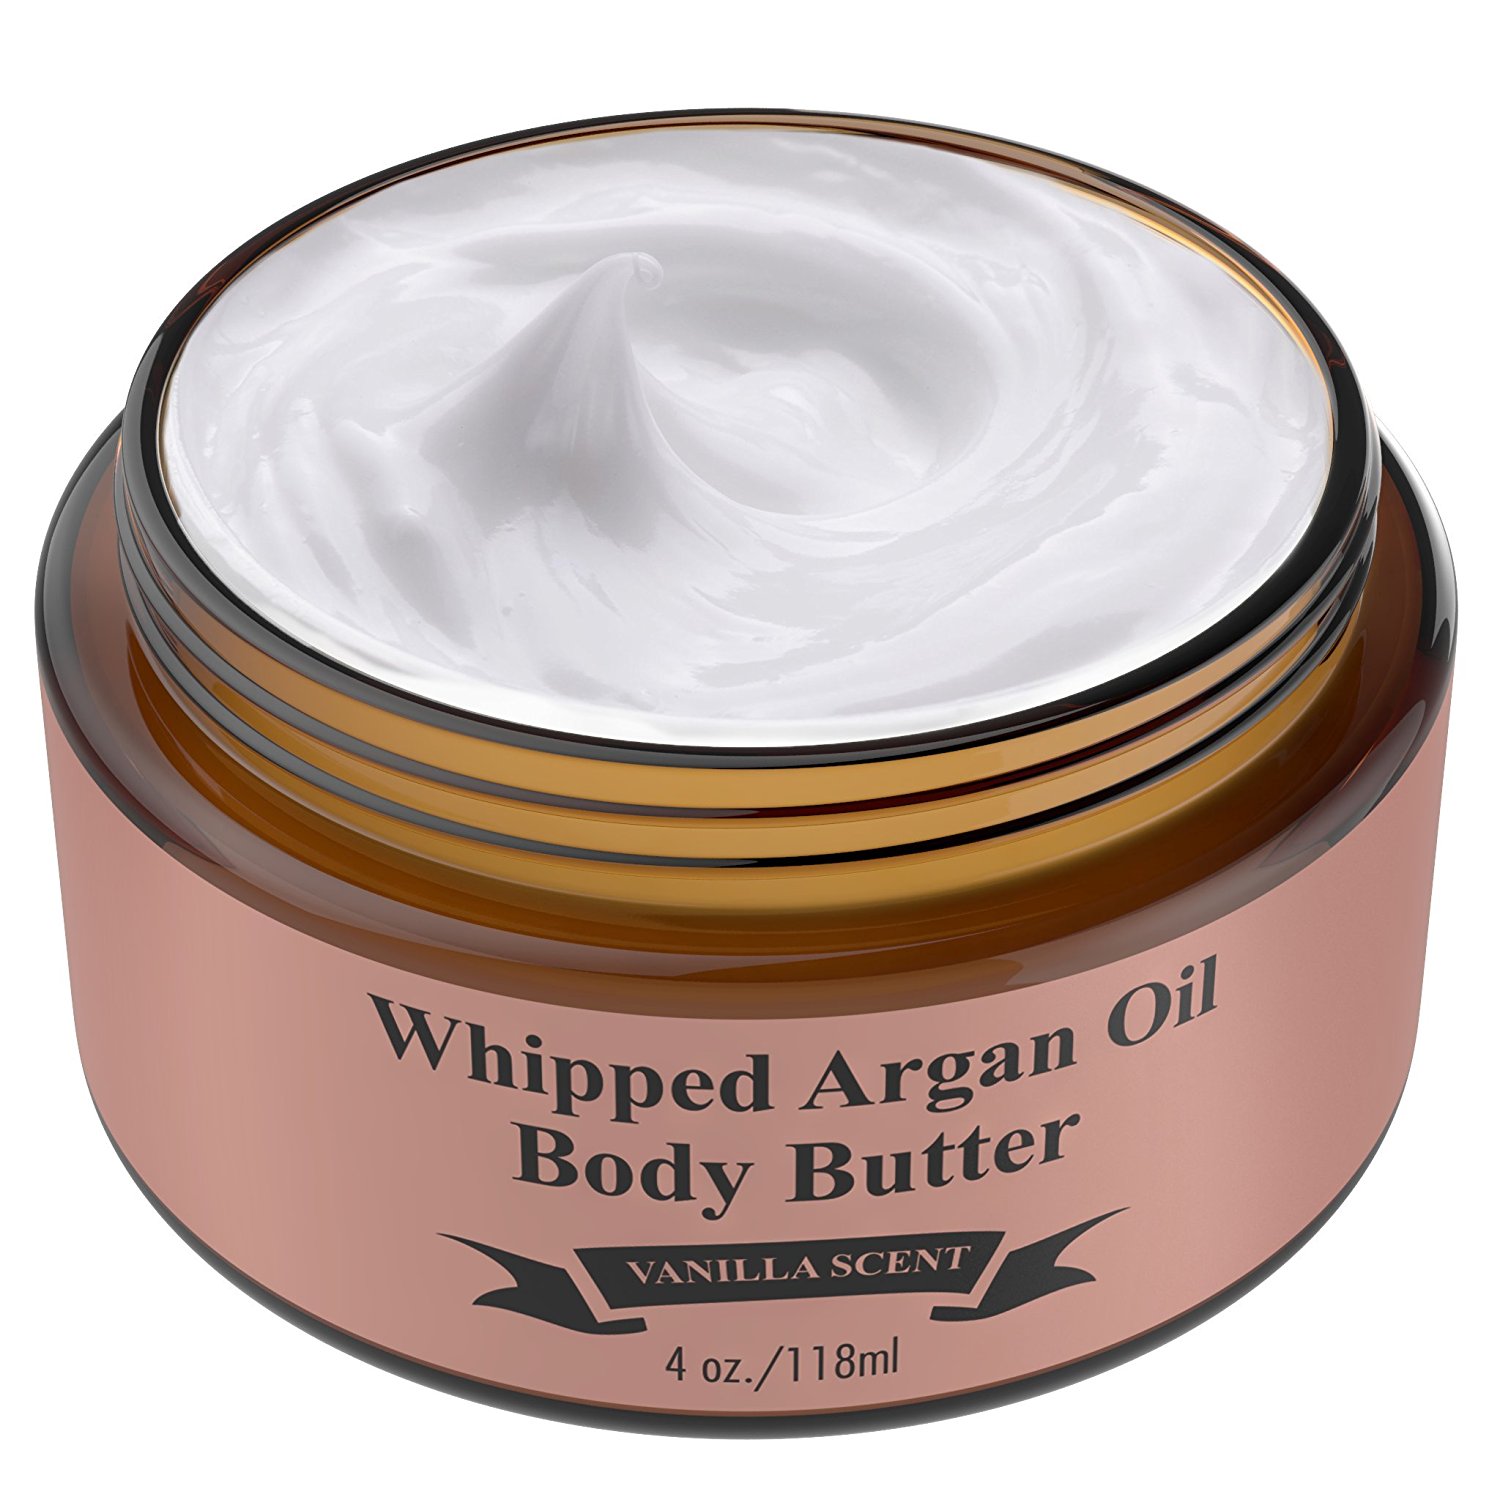 Whipped Argan Oil Body Butter Cream - The Gentlemen's - Make Your Skin Soft & Silky Smooth - Made With Argan Oil Which Has Restorative And Antioxidant Properties - No Parabens (Vanilla)